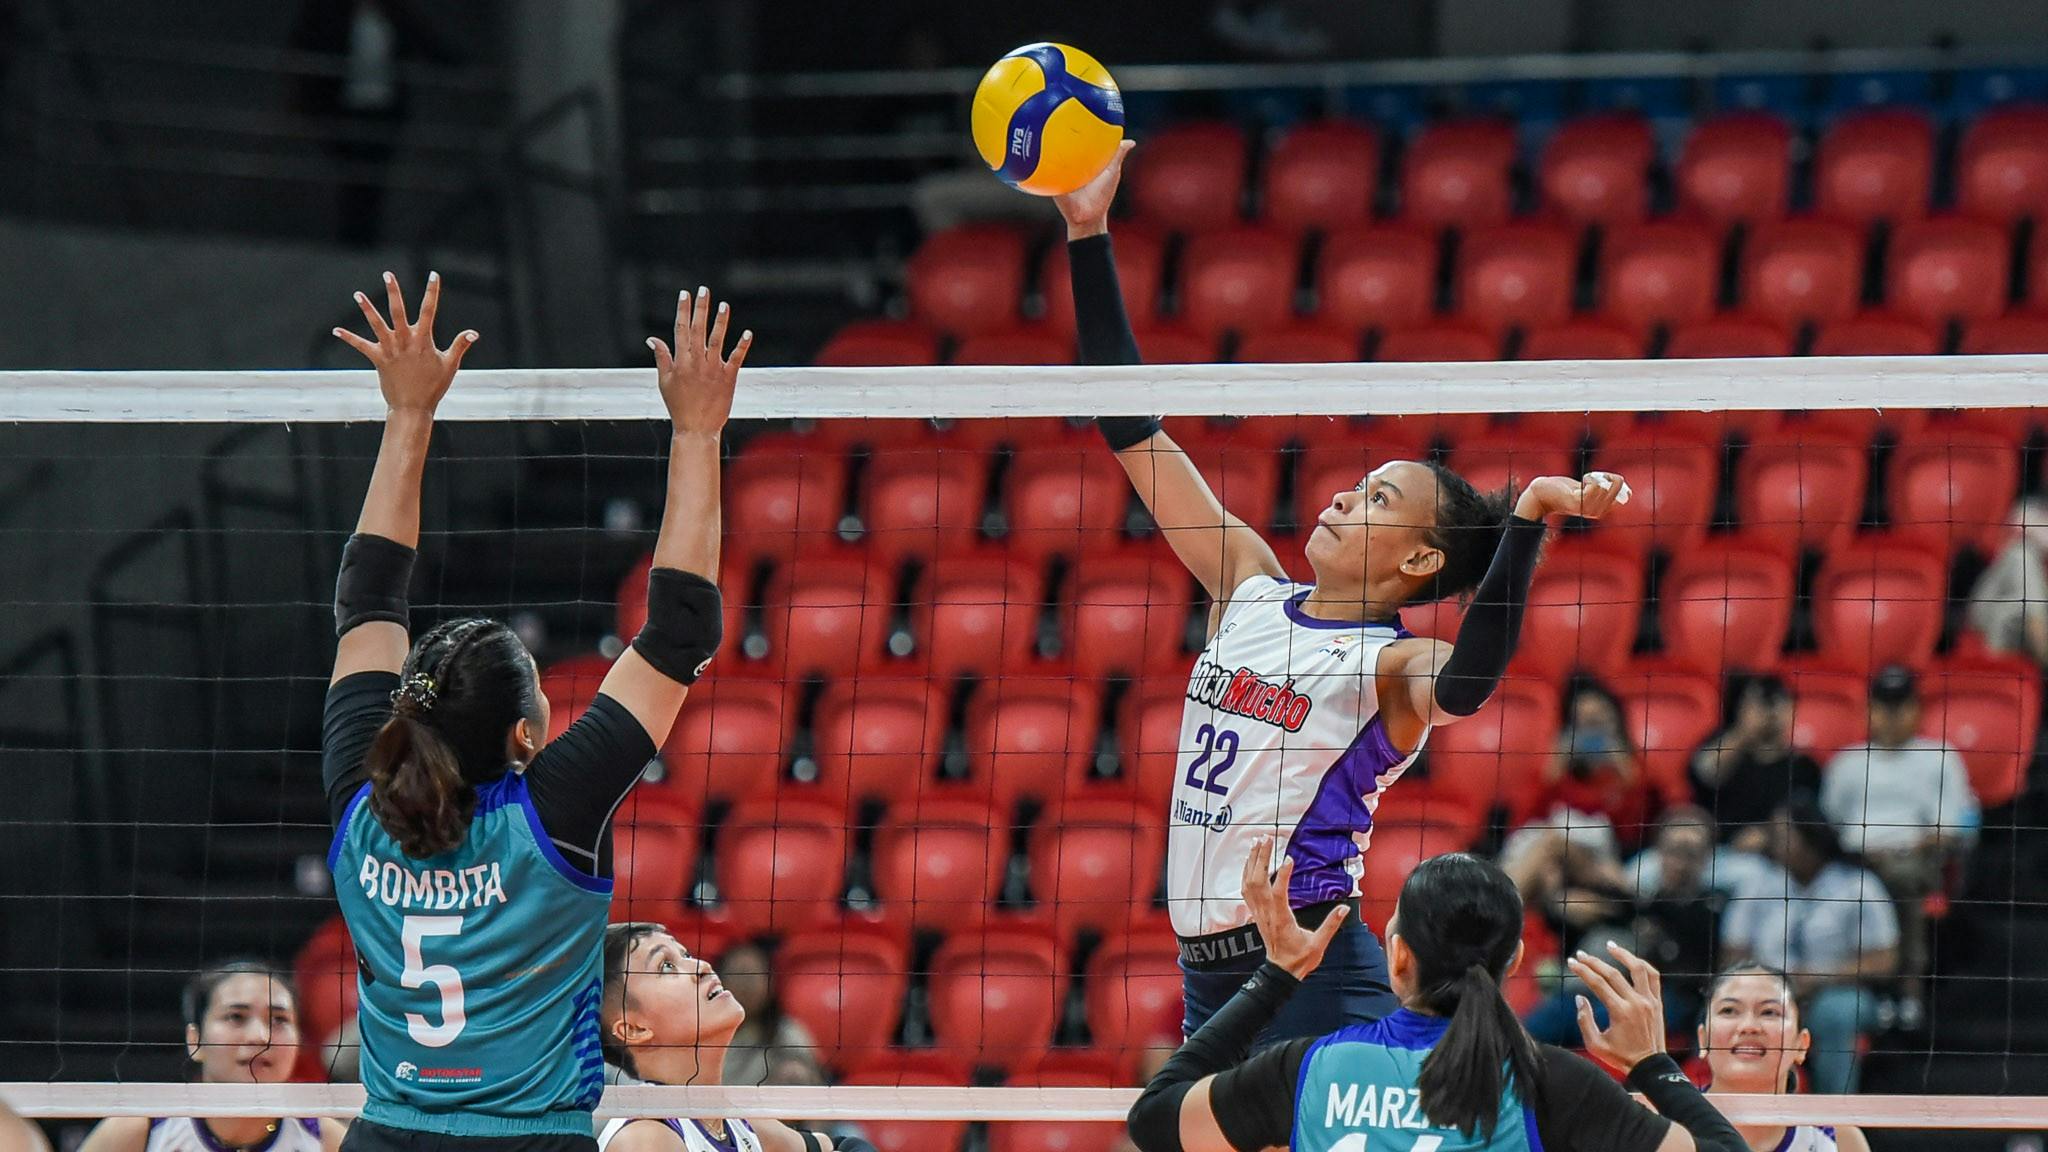 PVL: Cherry Nunag, Choco Mucho knock down Galeries Tower, forge three-way tie for top spot